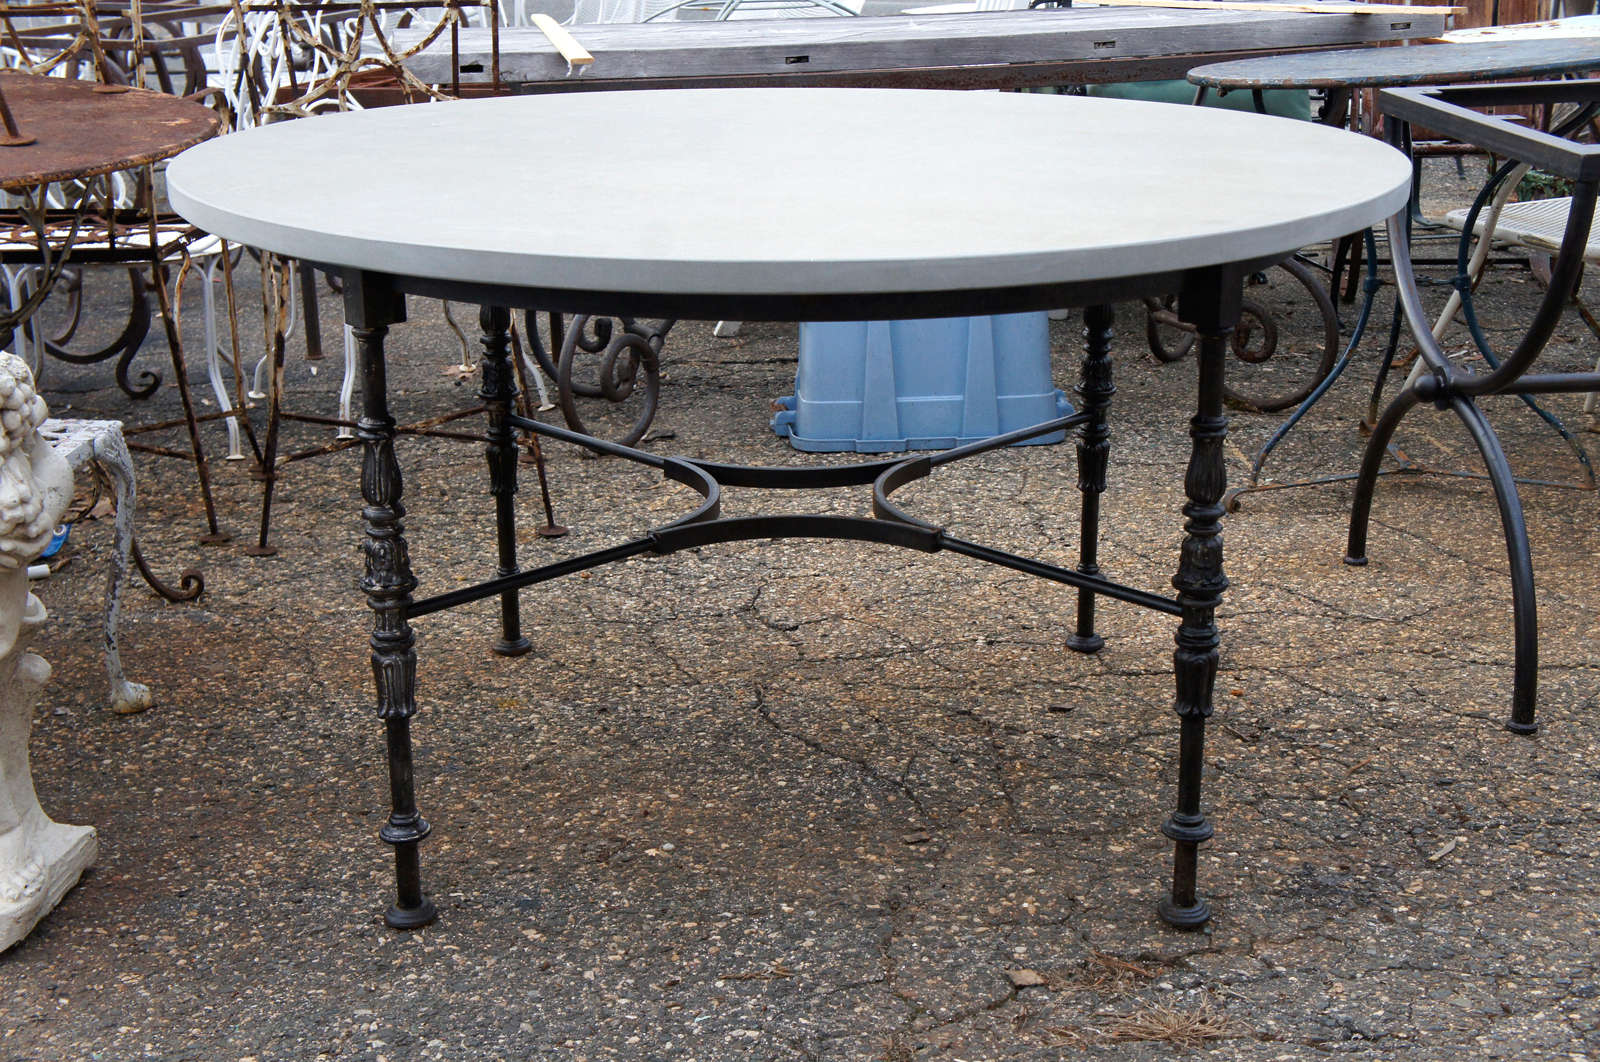 Wonderful iron base table with stone top.  Can be used indoor or outdoors.  Perfect kitchen, dining or center hall table.  Top and base can be sold separately.  Stone top:  $1500; Base:  $3300.